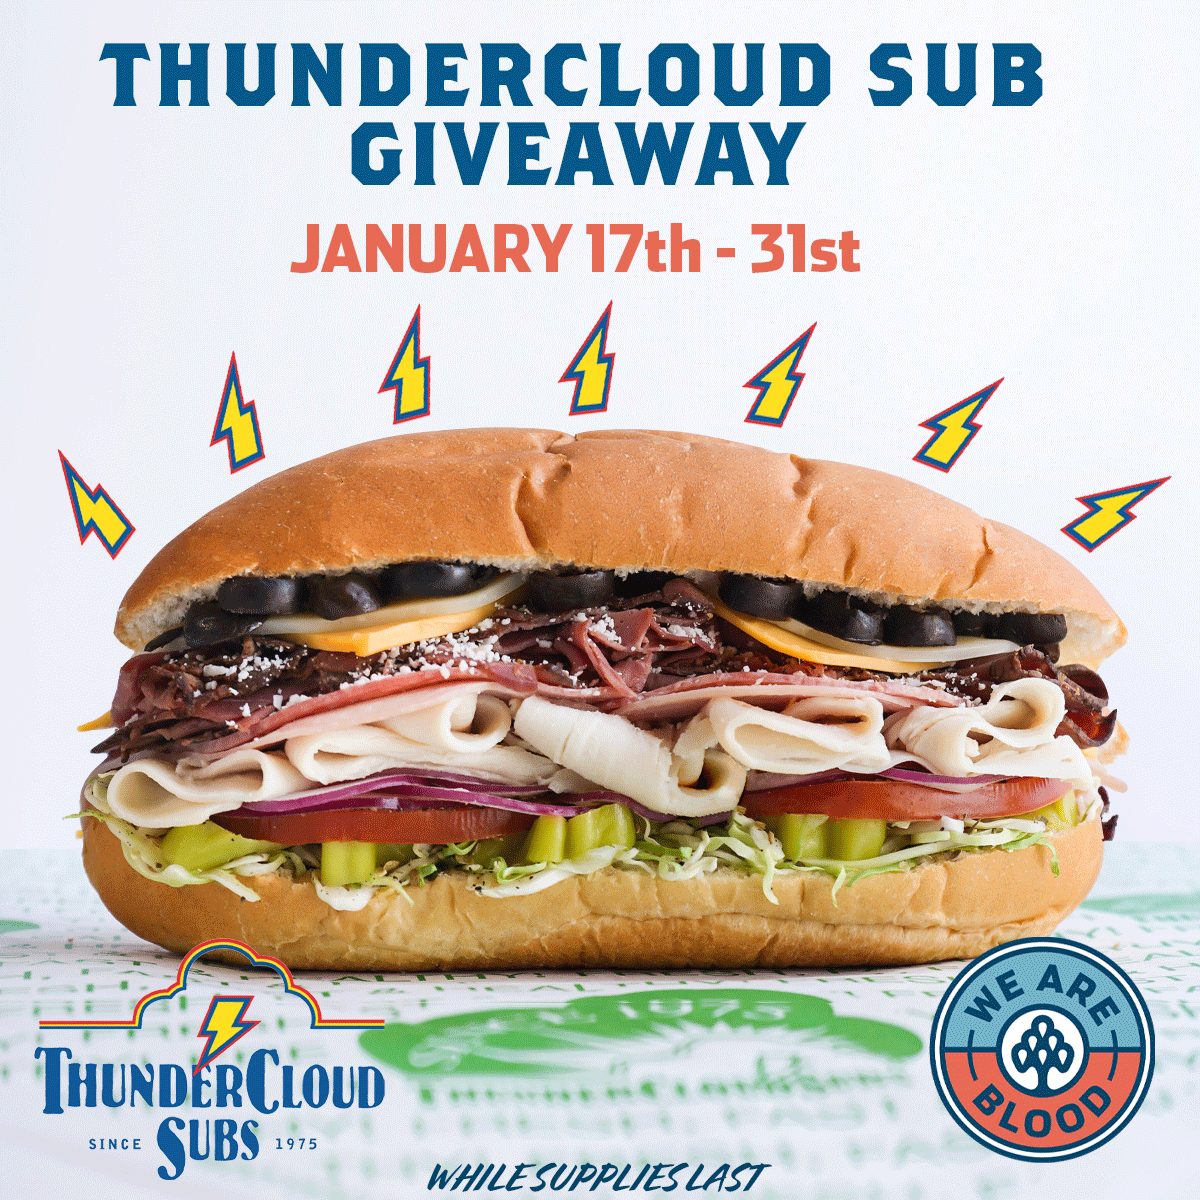 Donate Blood at We Are Blood, Get a Free Small Sub from Thundercloud